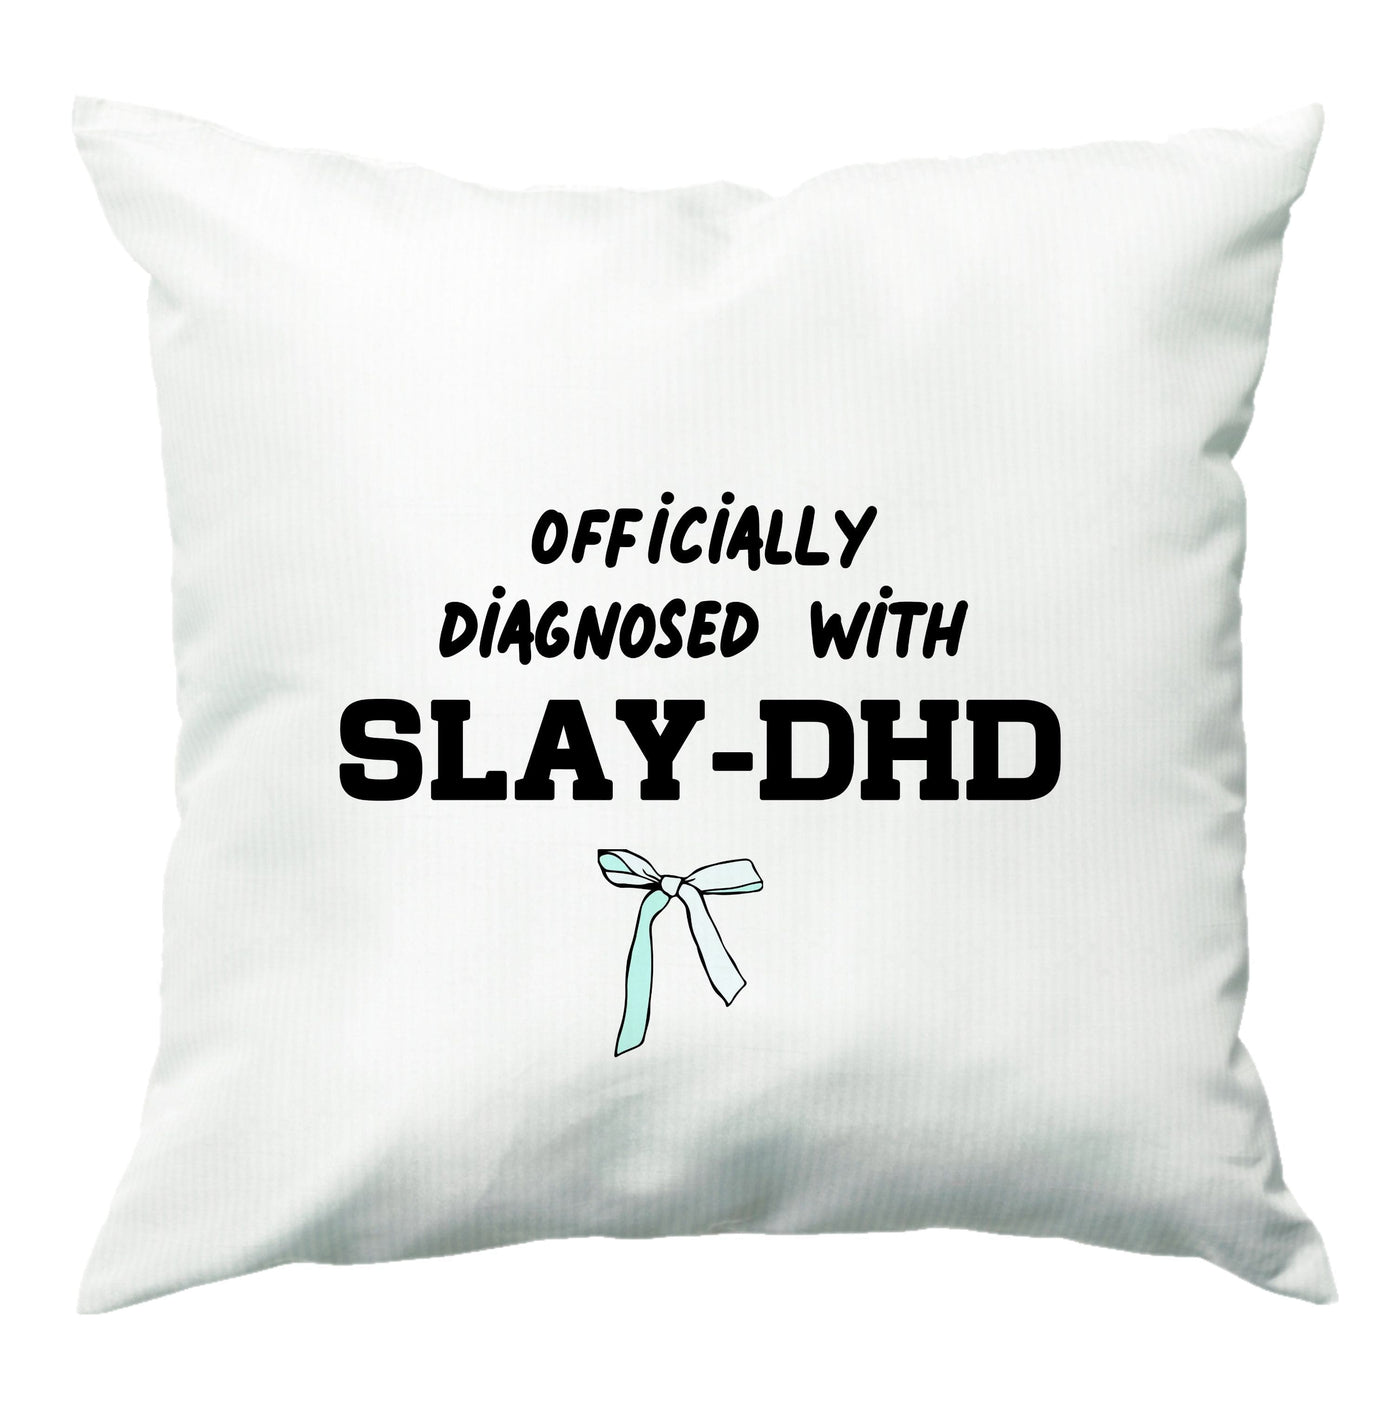 Officially Diagnosed With Slay-DHD - TikTok Trends Cushion